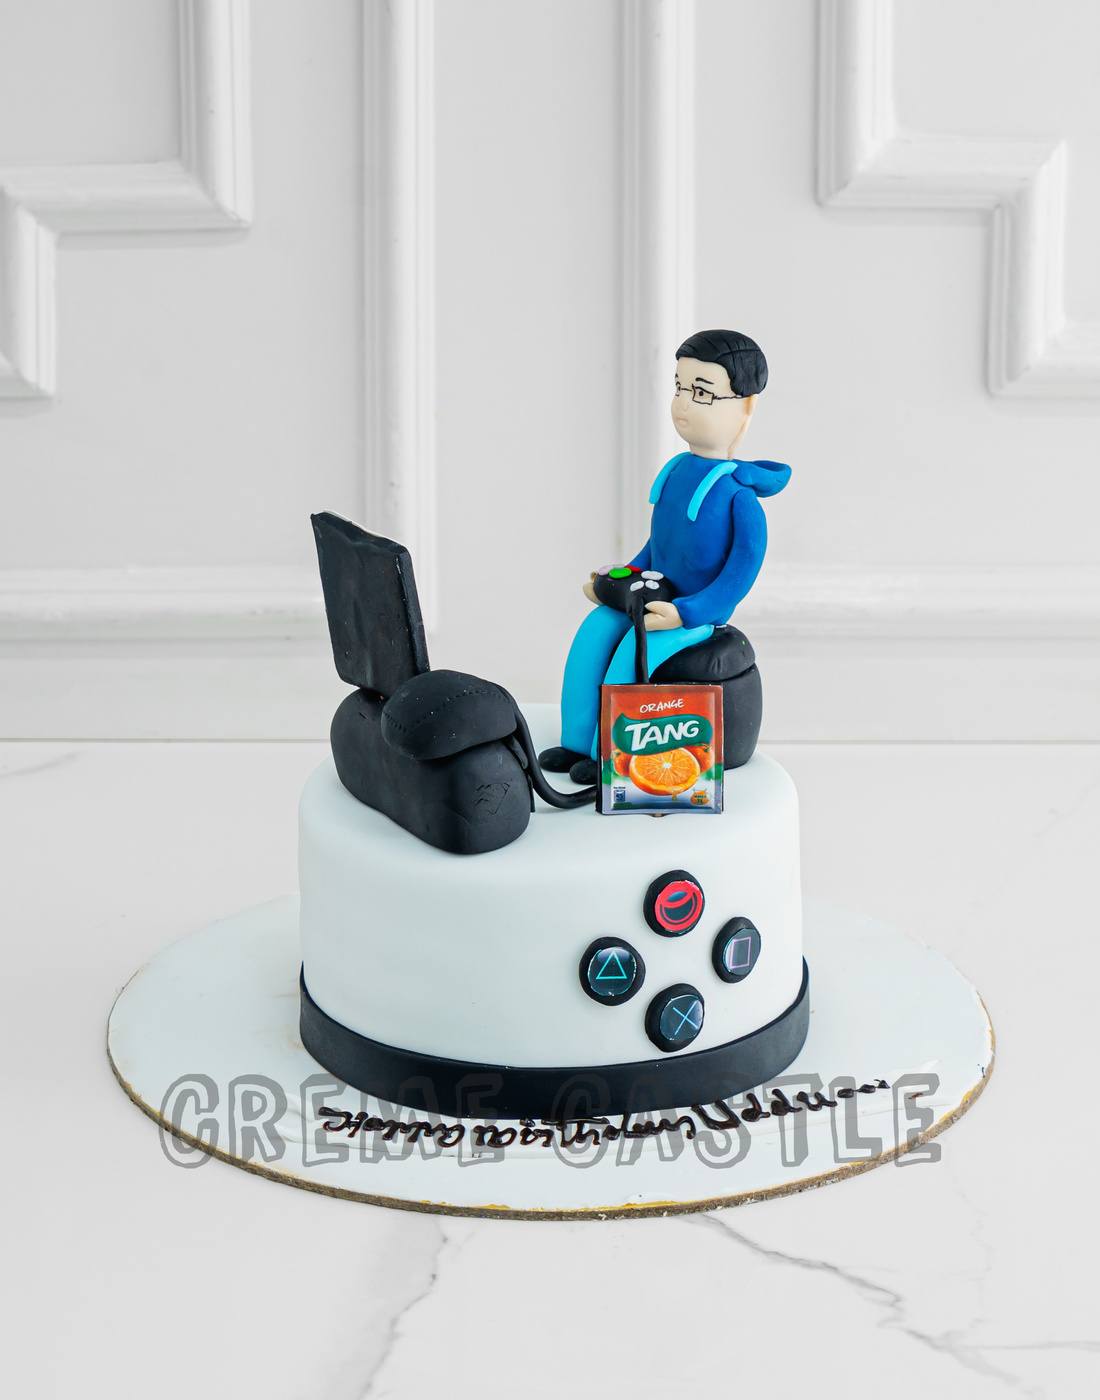 40+ Gaming Cake Ideas For Kids Of All Ages